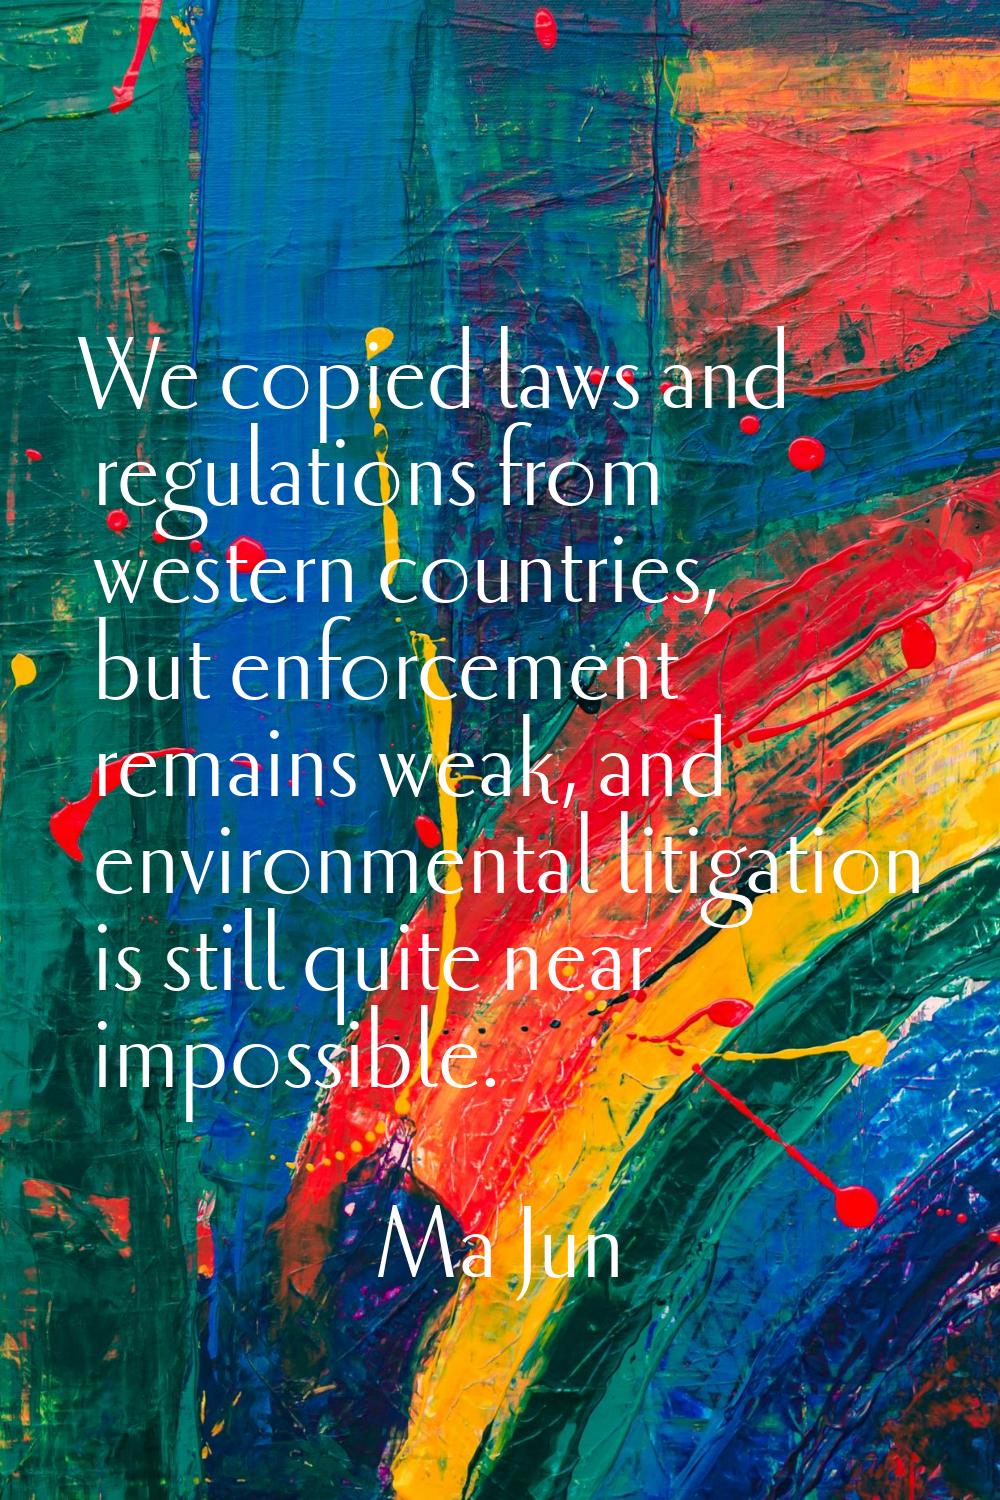 We copied laws and regulations from western countries, but enforcement remains weak, and environmen